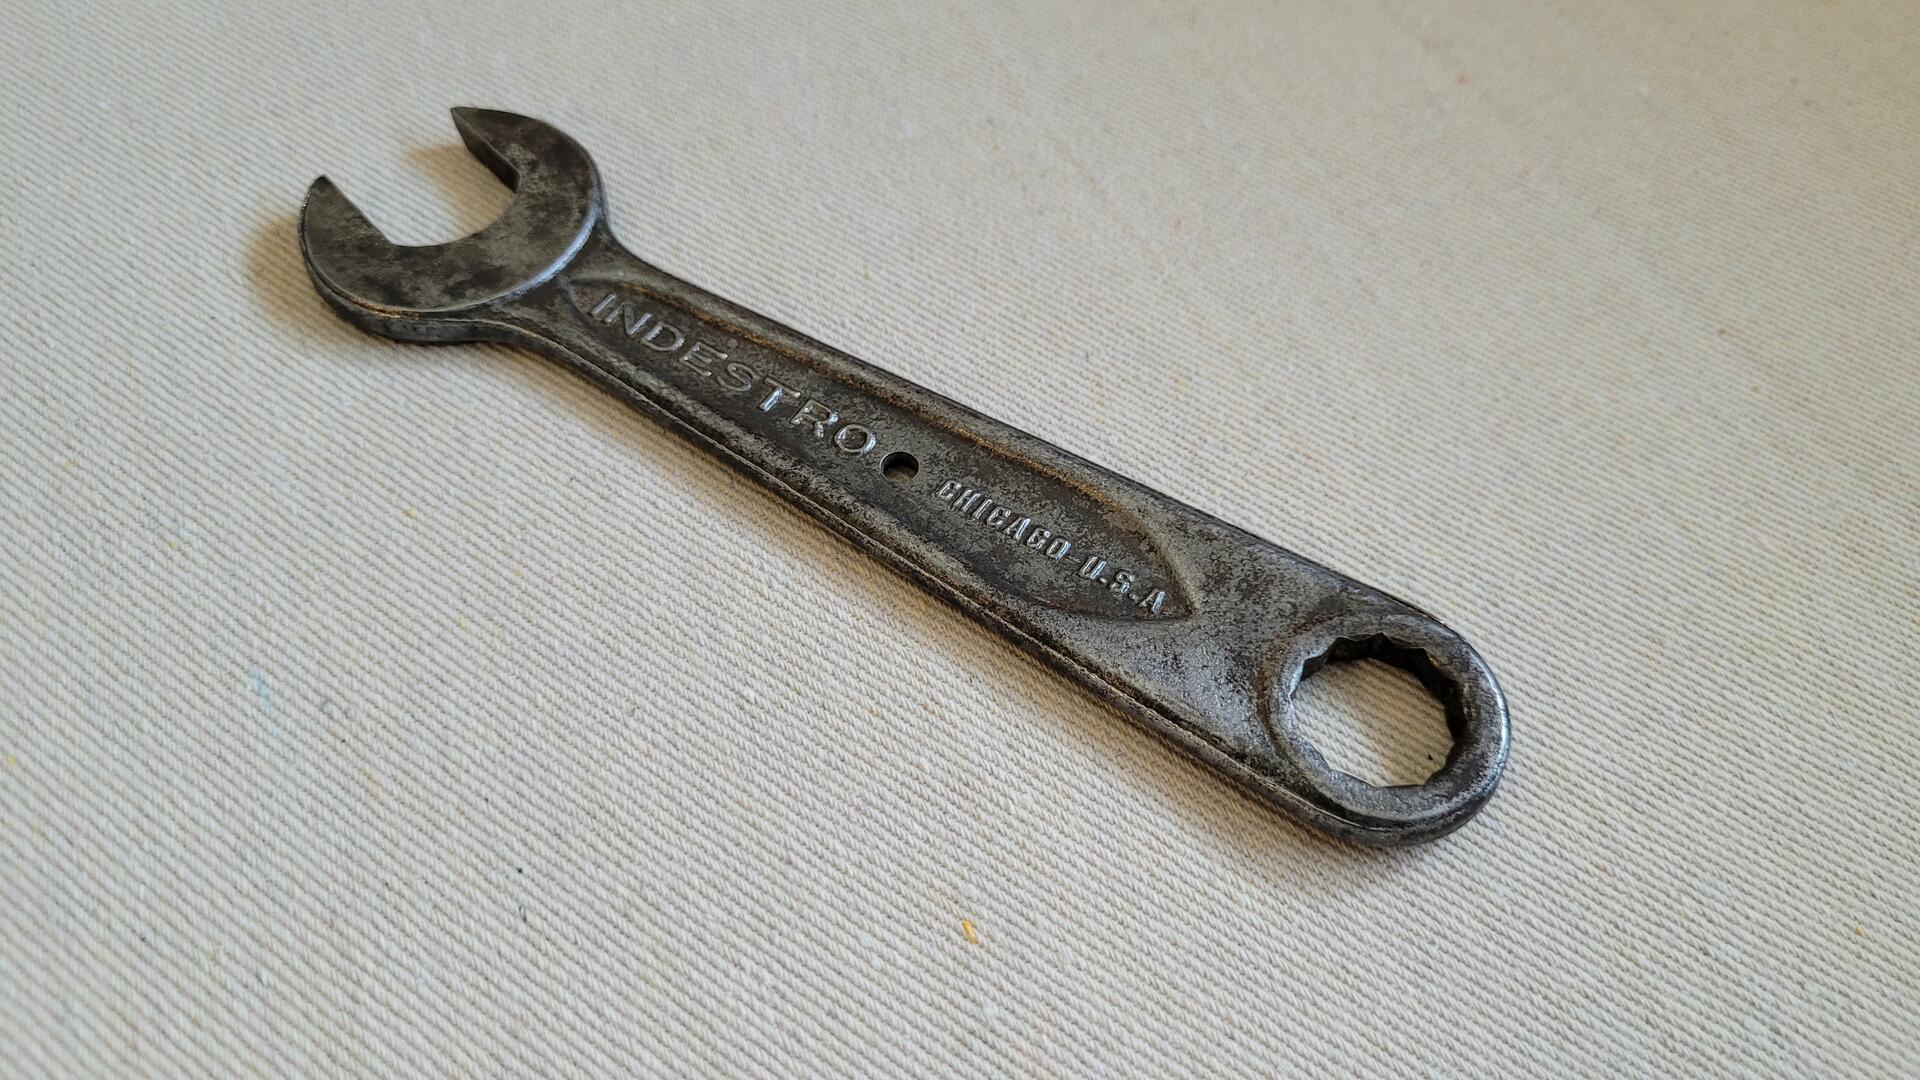 indestro-open-box-end-combination-wrench-spanner-antique-vintage-made-in-usa-mechanic-hand-tools